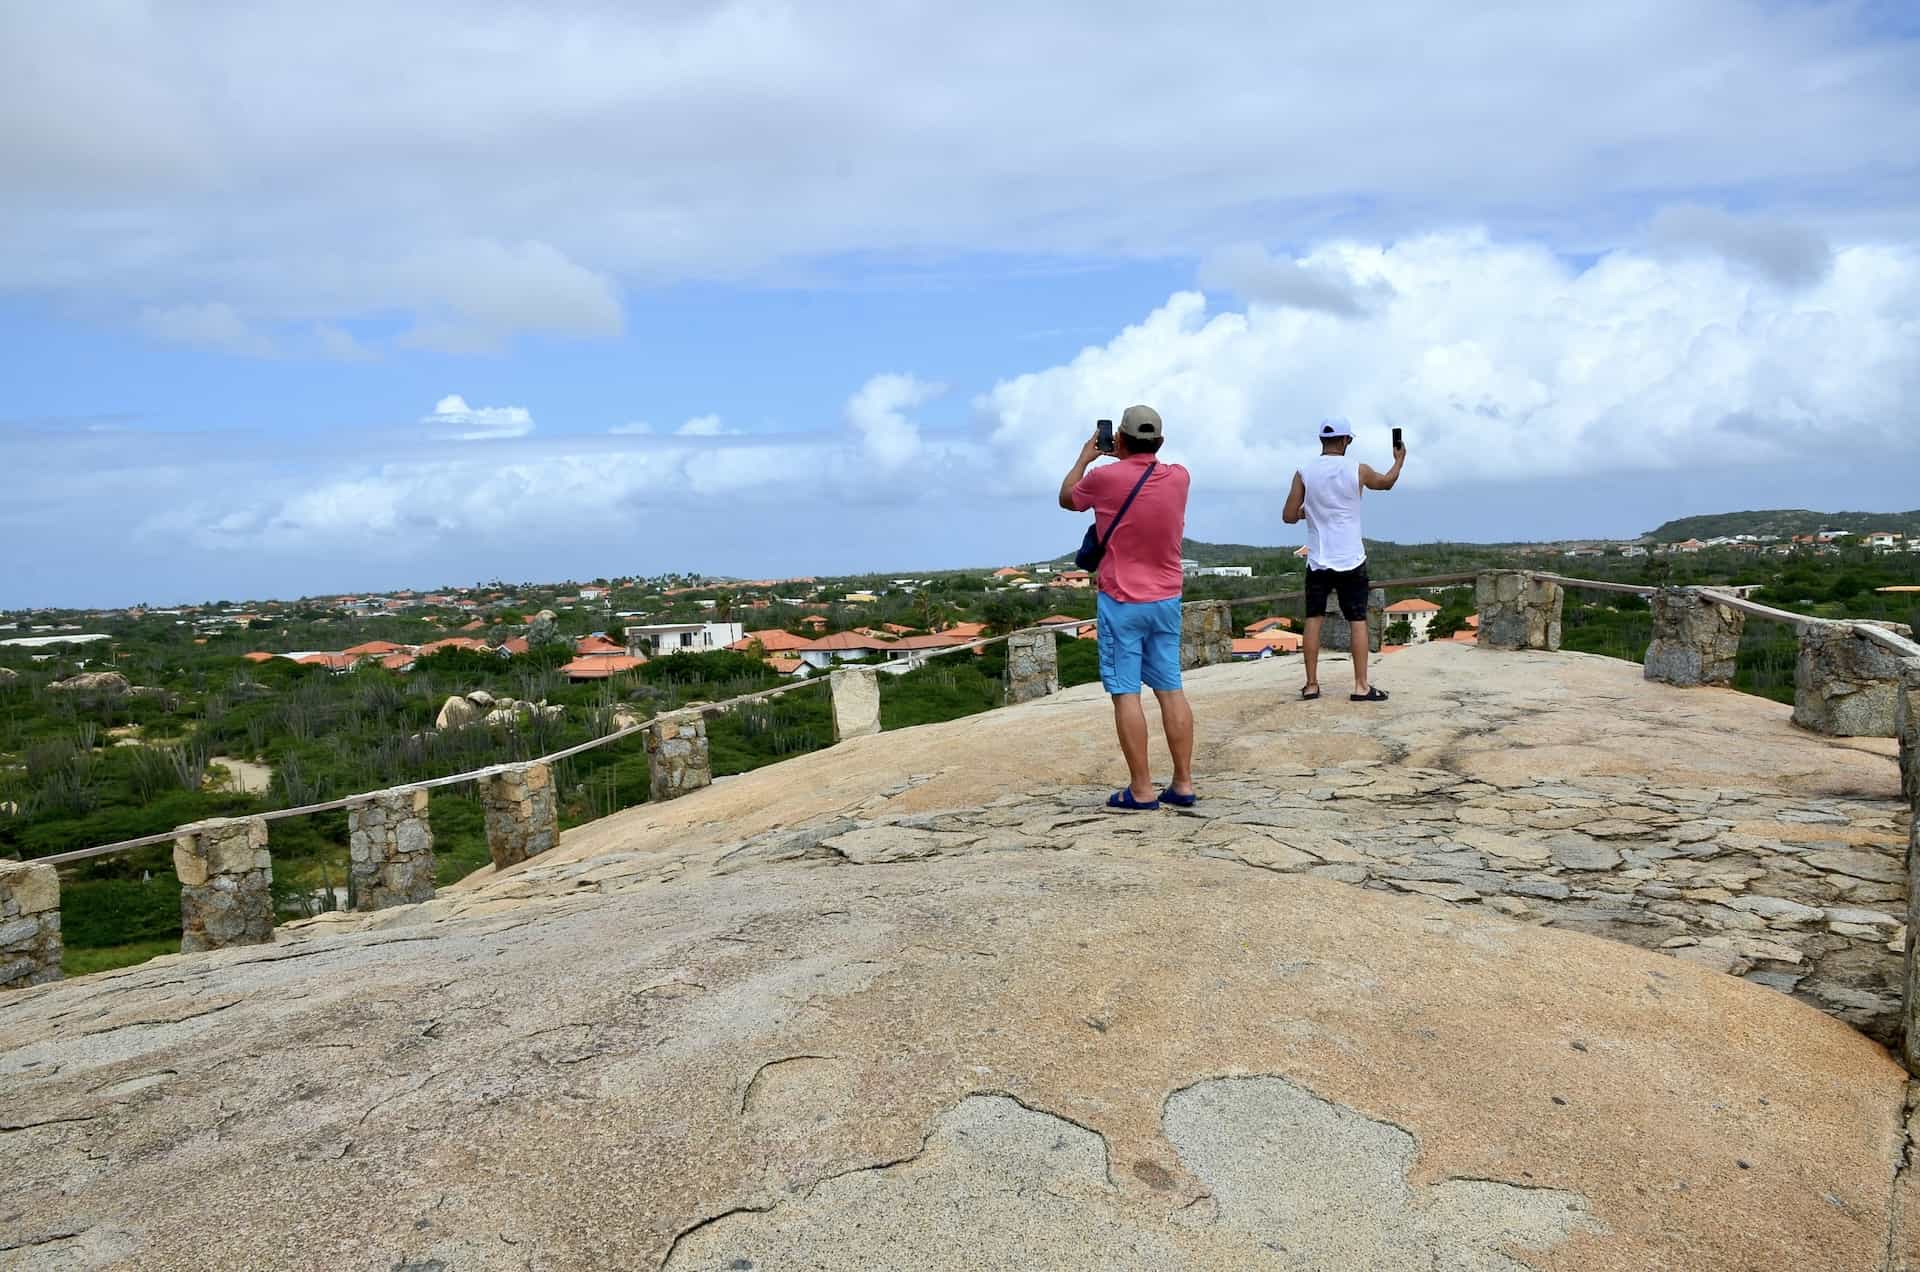 Top of the largest rock at the Casibari Rock Formations in Paradera, Aruba